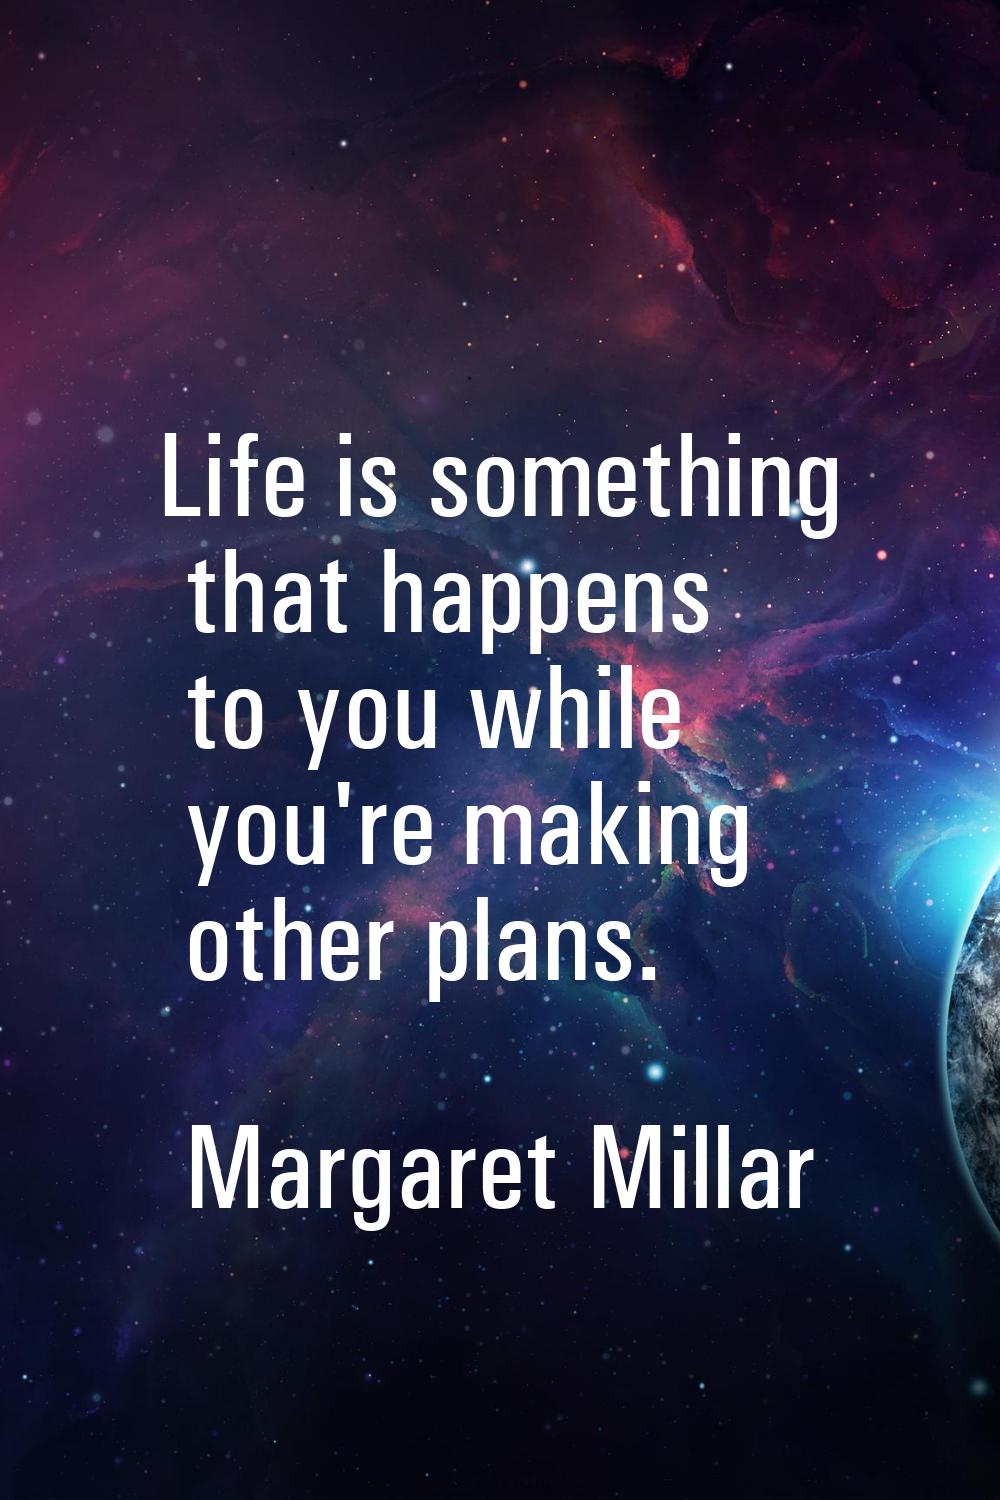 Life is something that happens to you while you're making other plans.